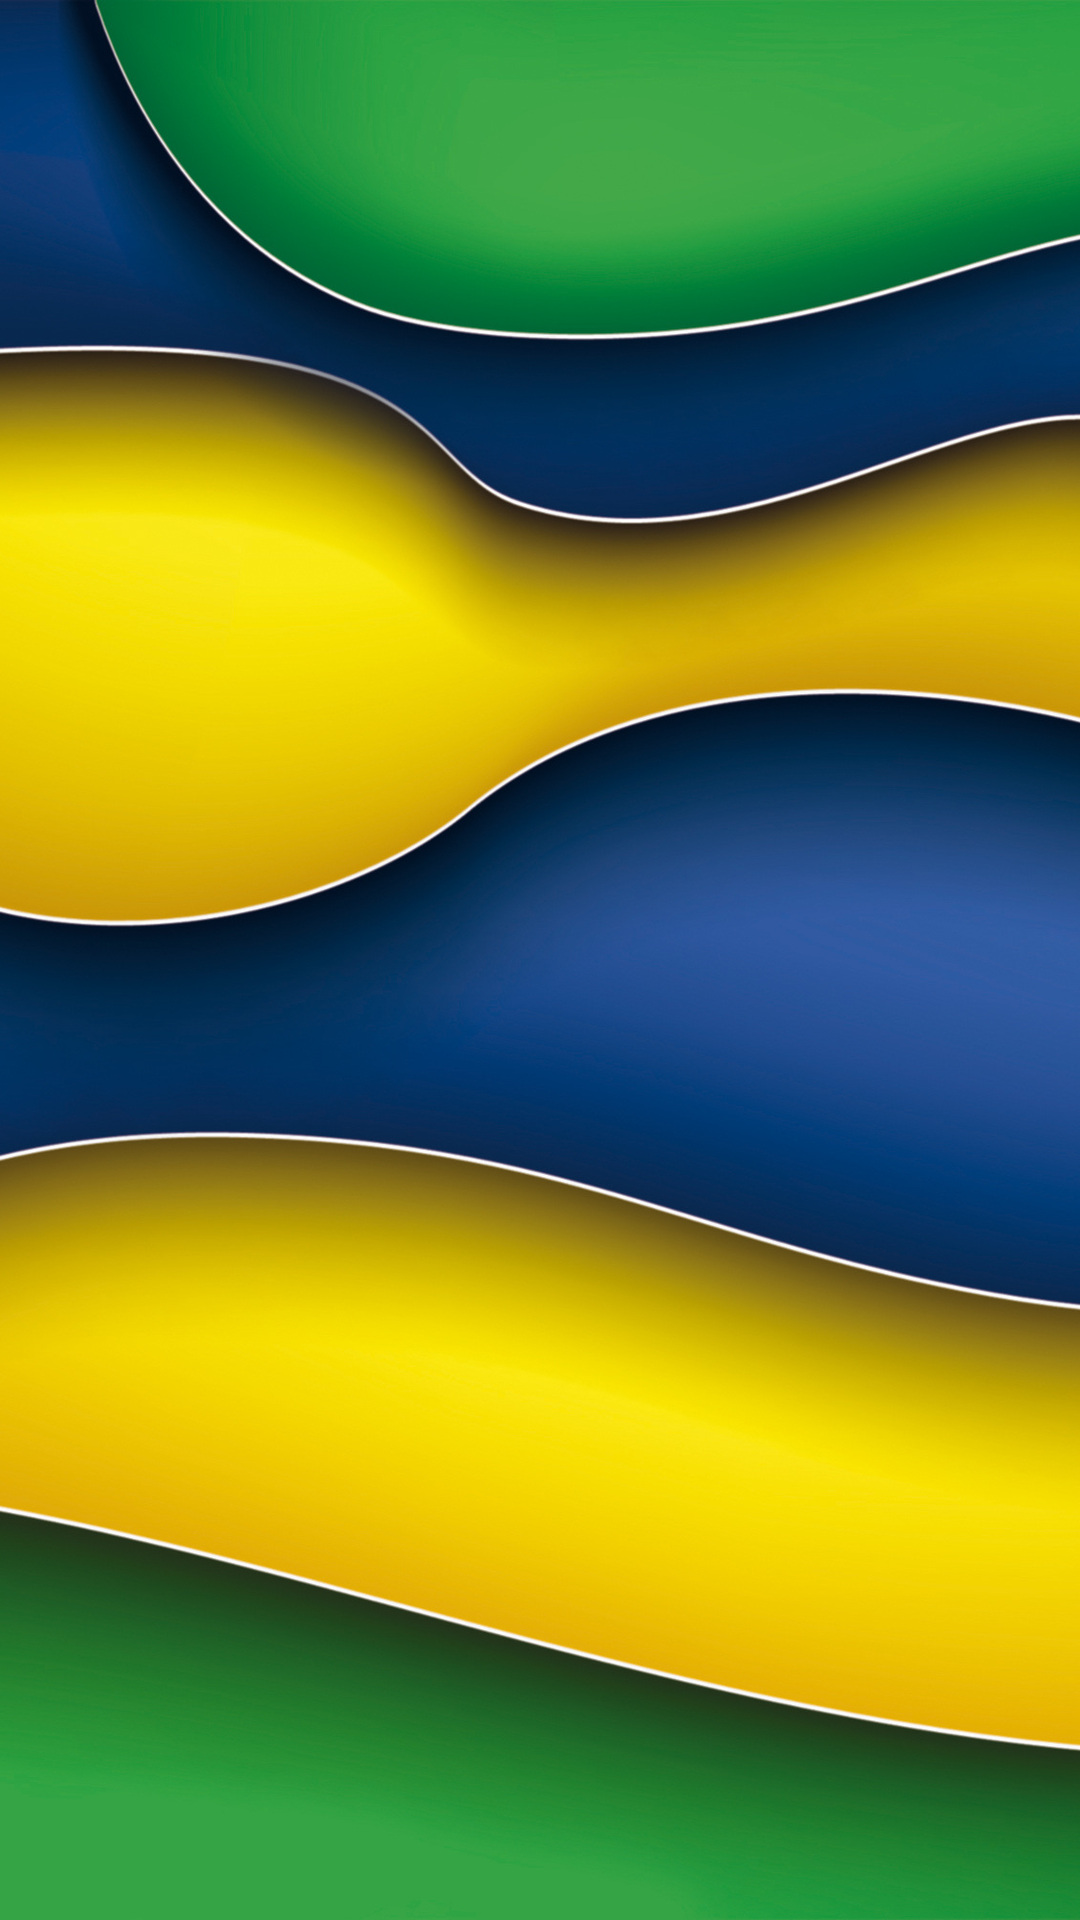 zedge hd wallpapers 1080p,blue,yellow,green,line,material property